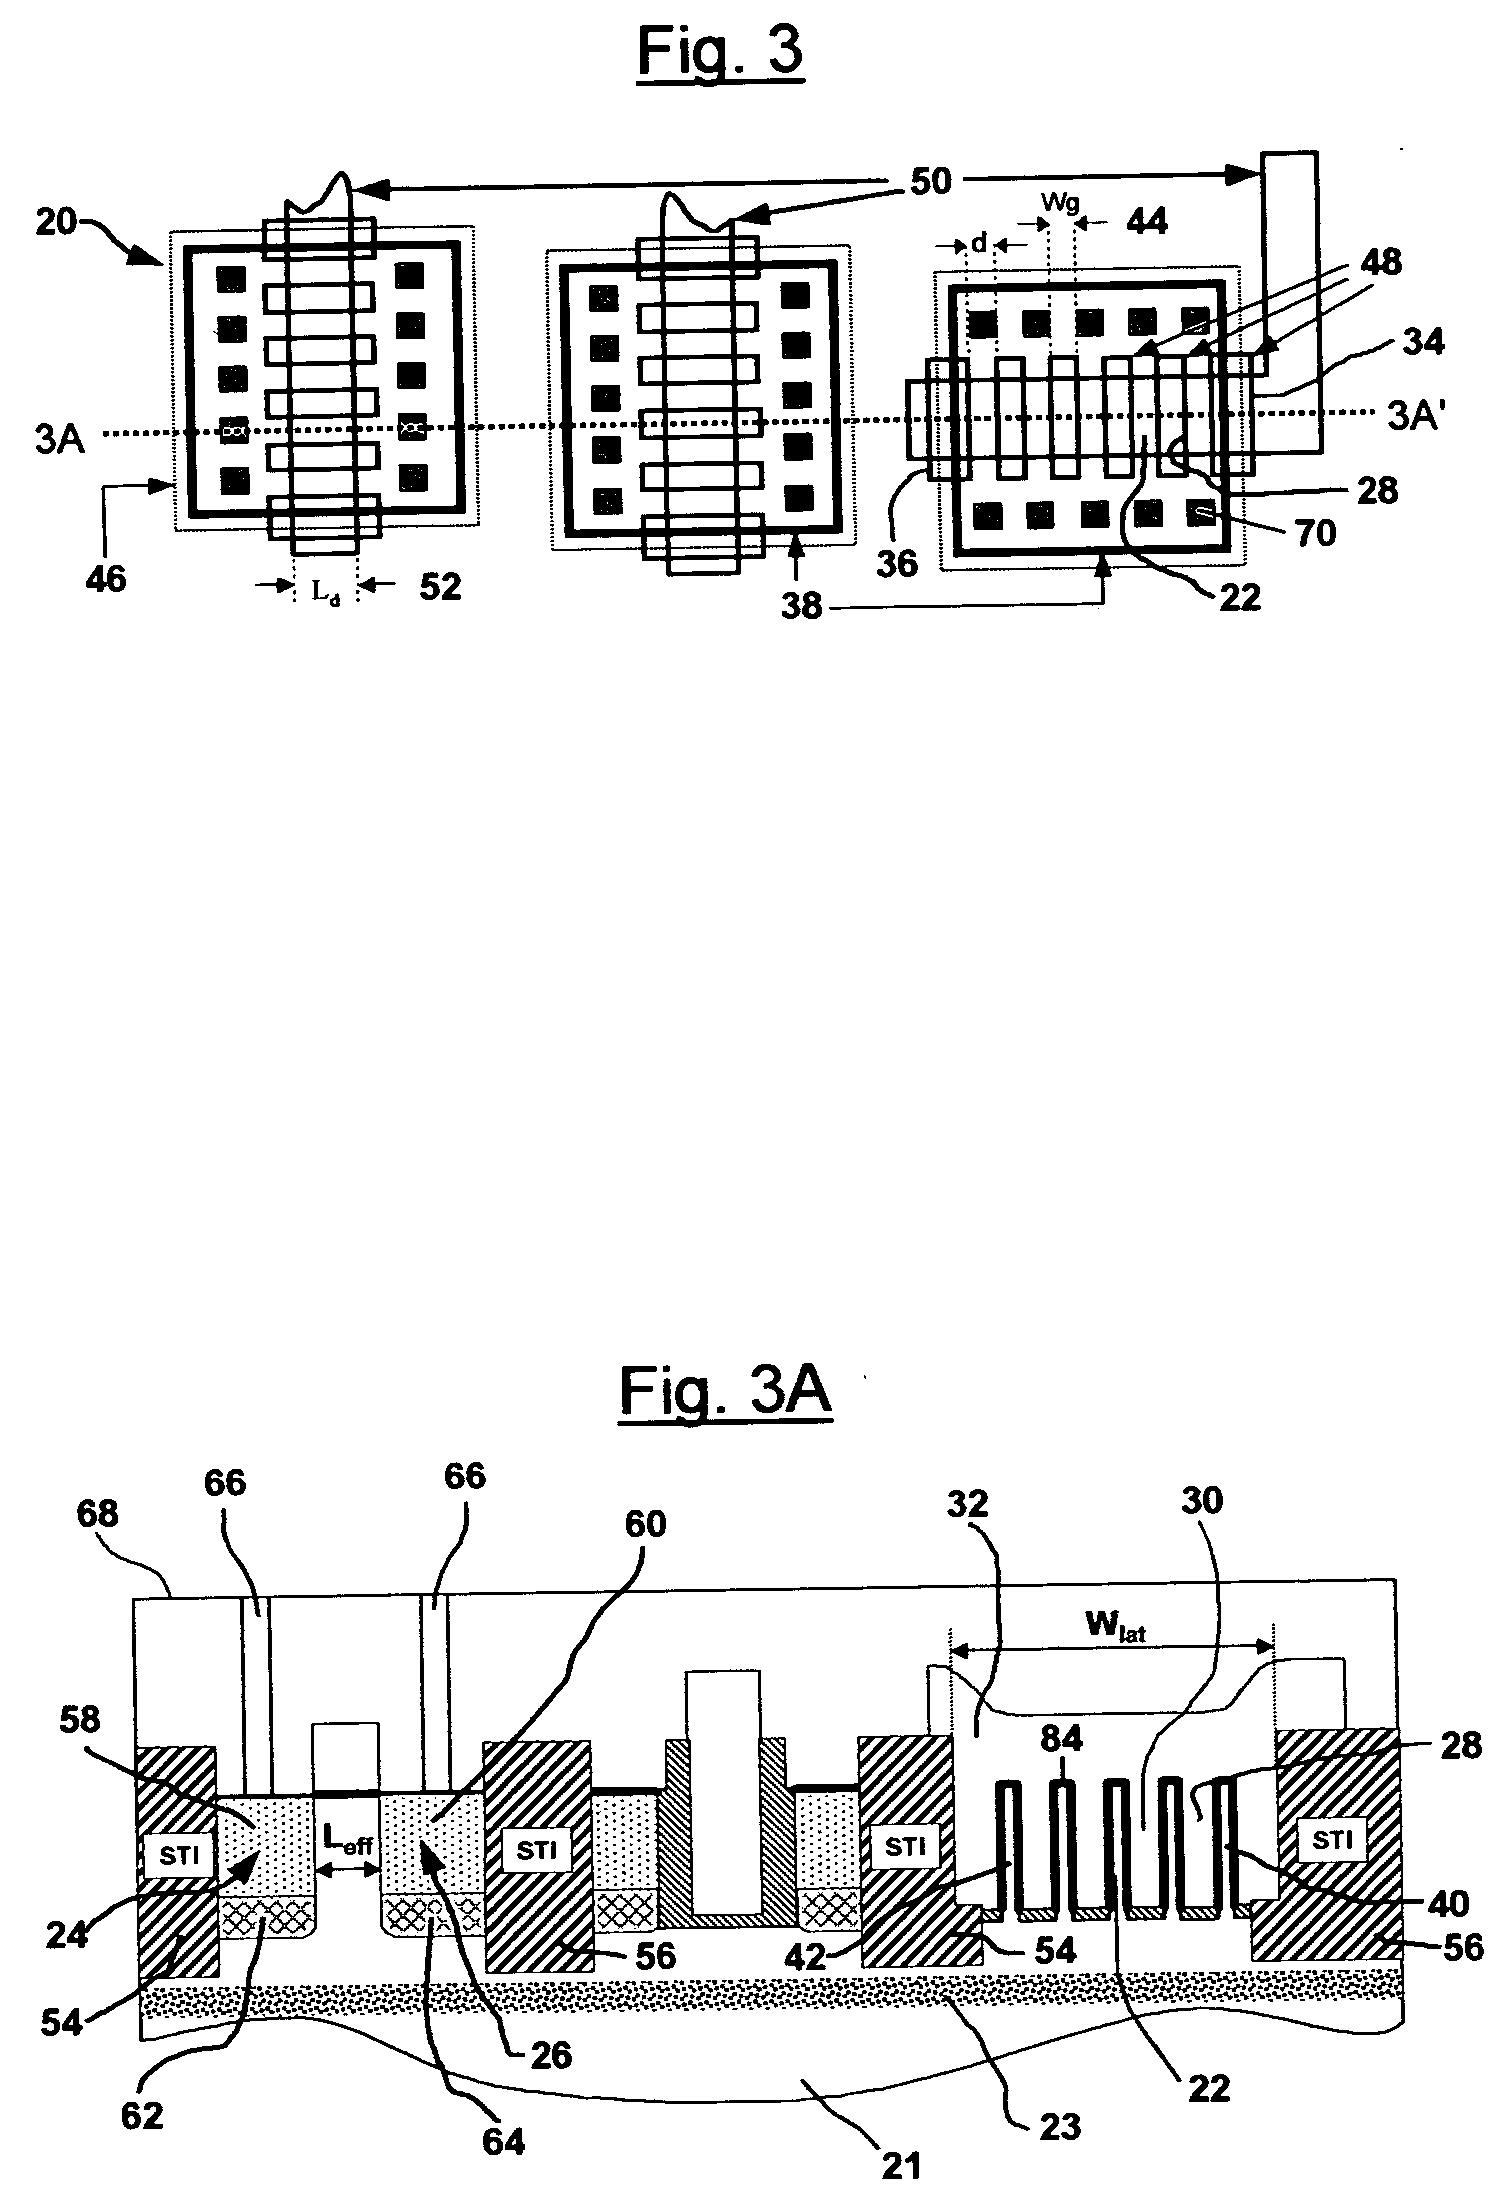 Fully-depleted castellated gate MOSFET device and method of manufacture thereof